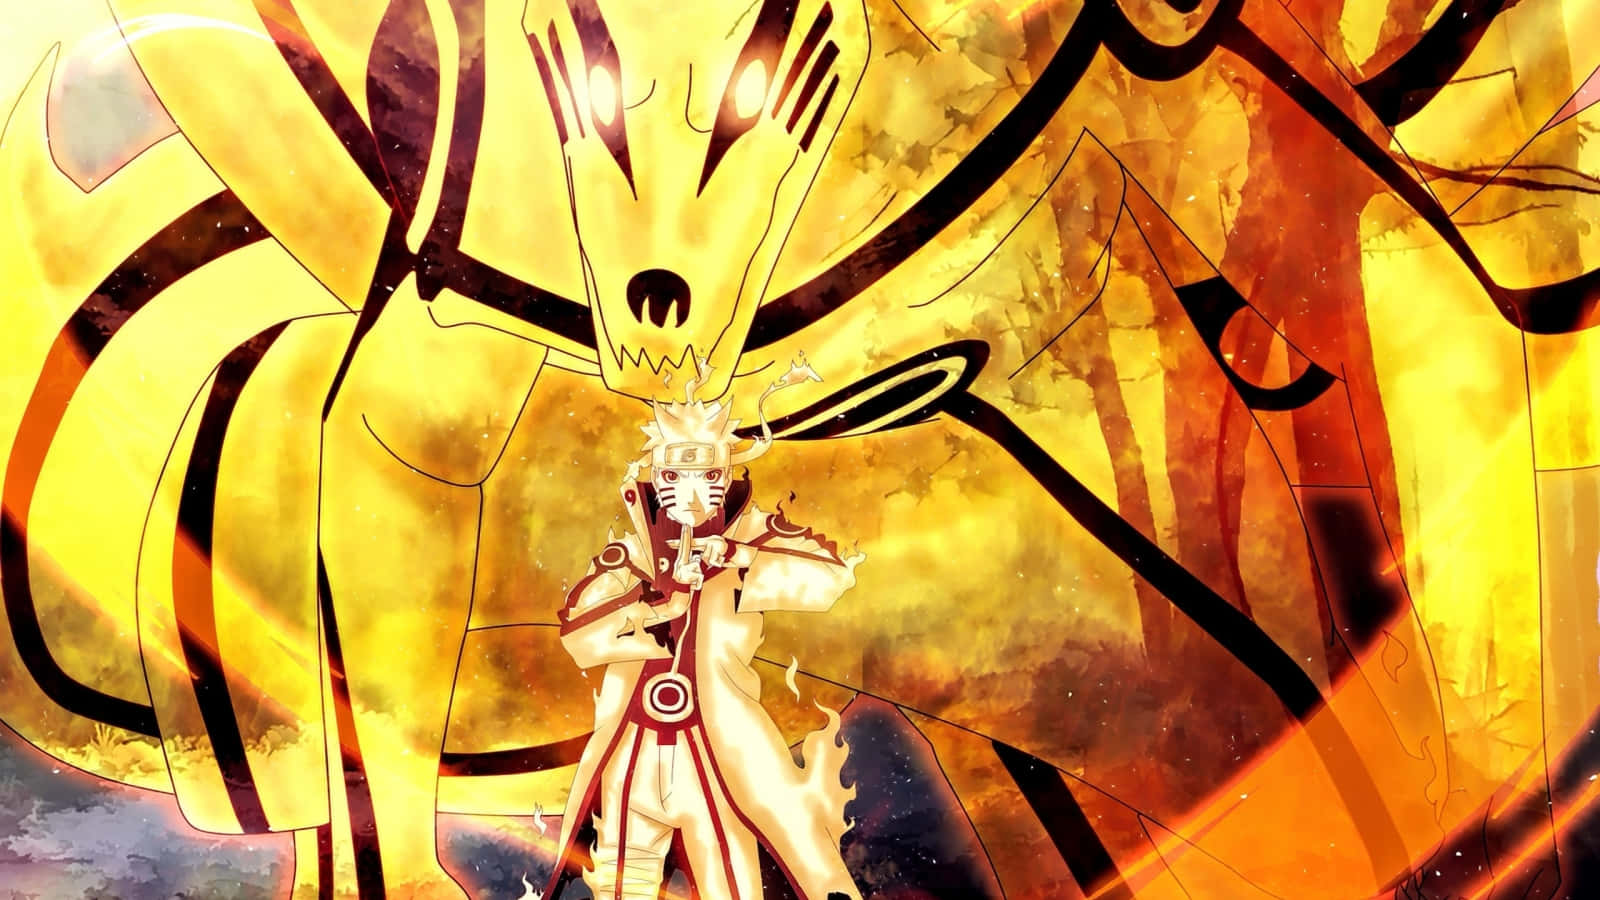 Naruto Uzumaki unleashes the power of the Nine-Tailed Fox within him. Wallpaper